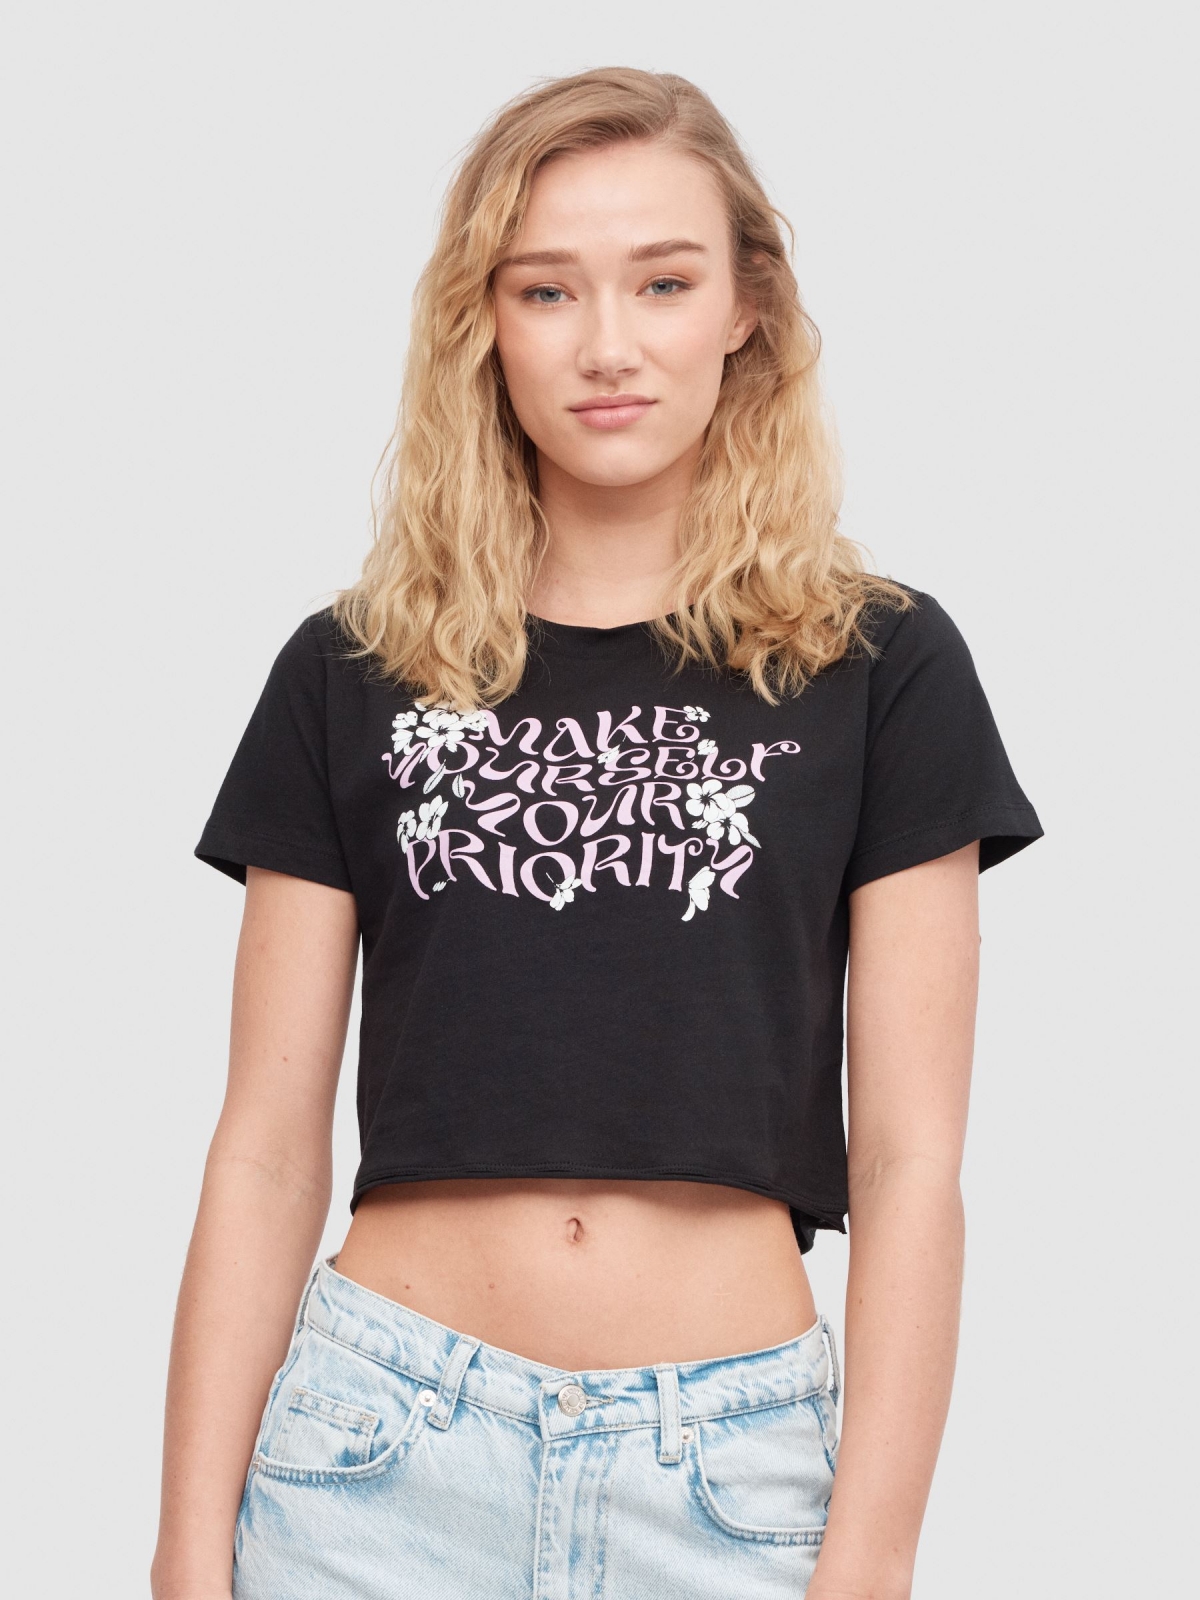 Yourself Priority T-shirt black middle front view